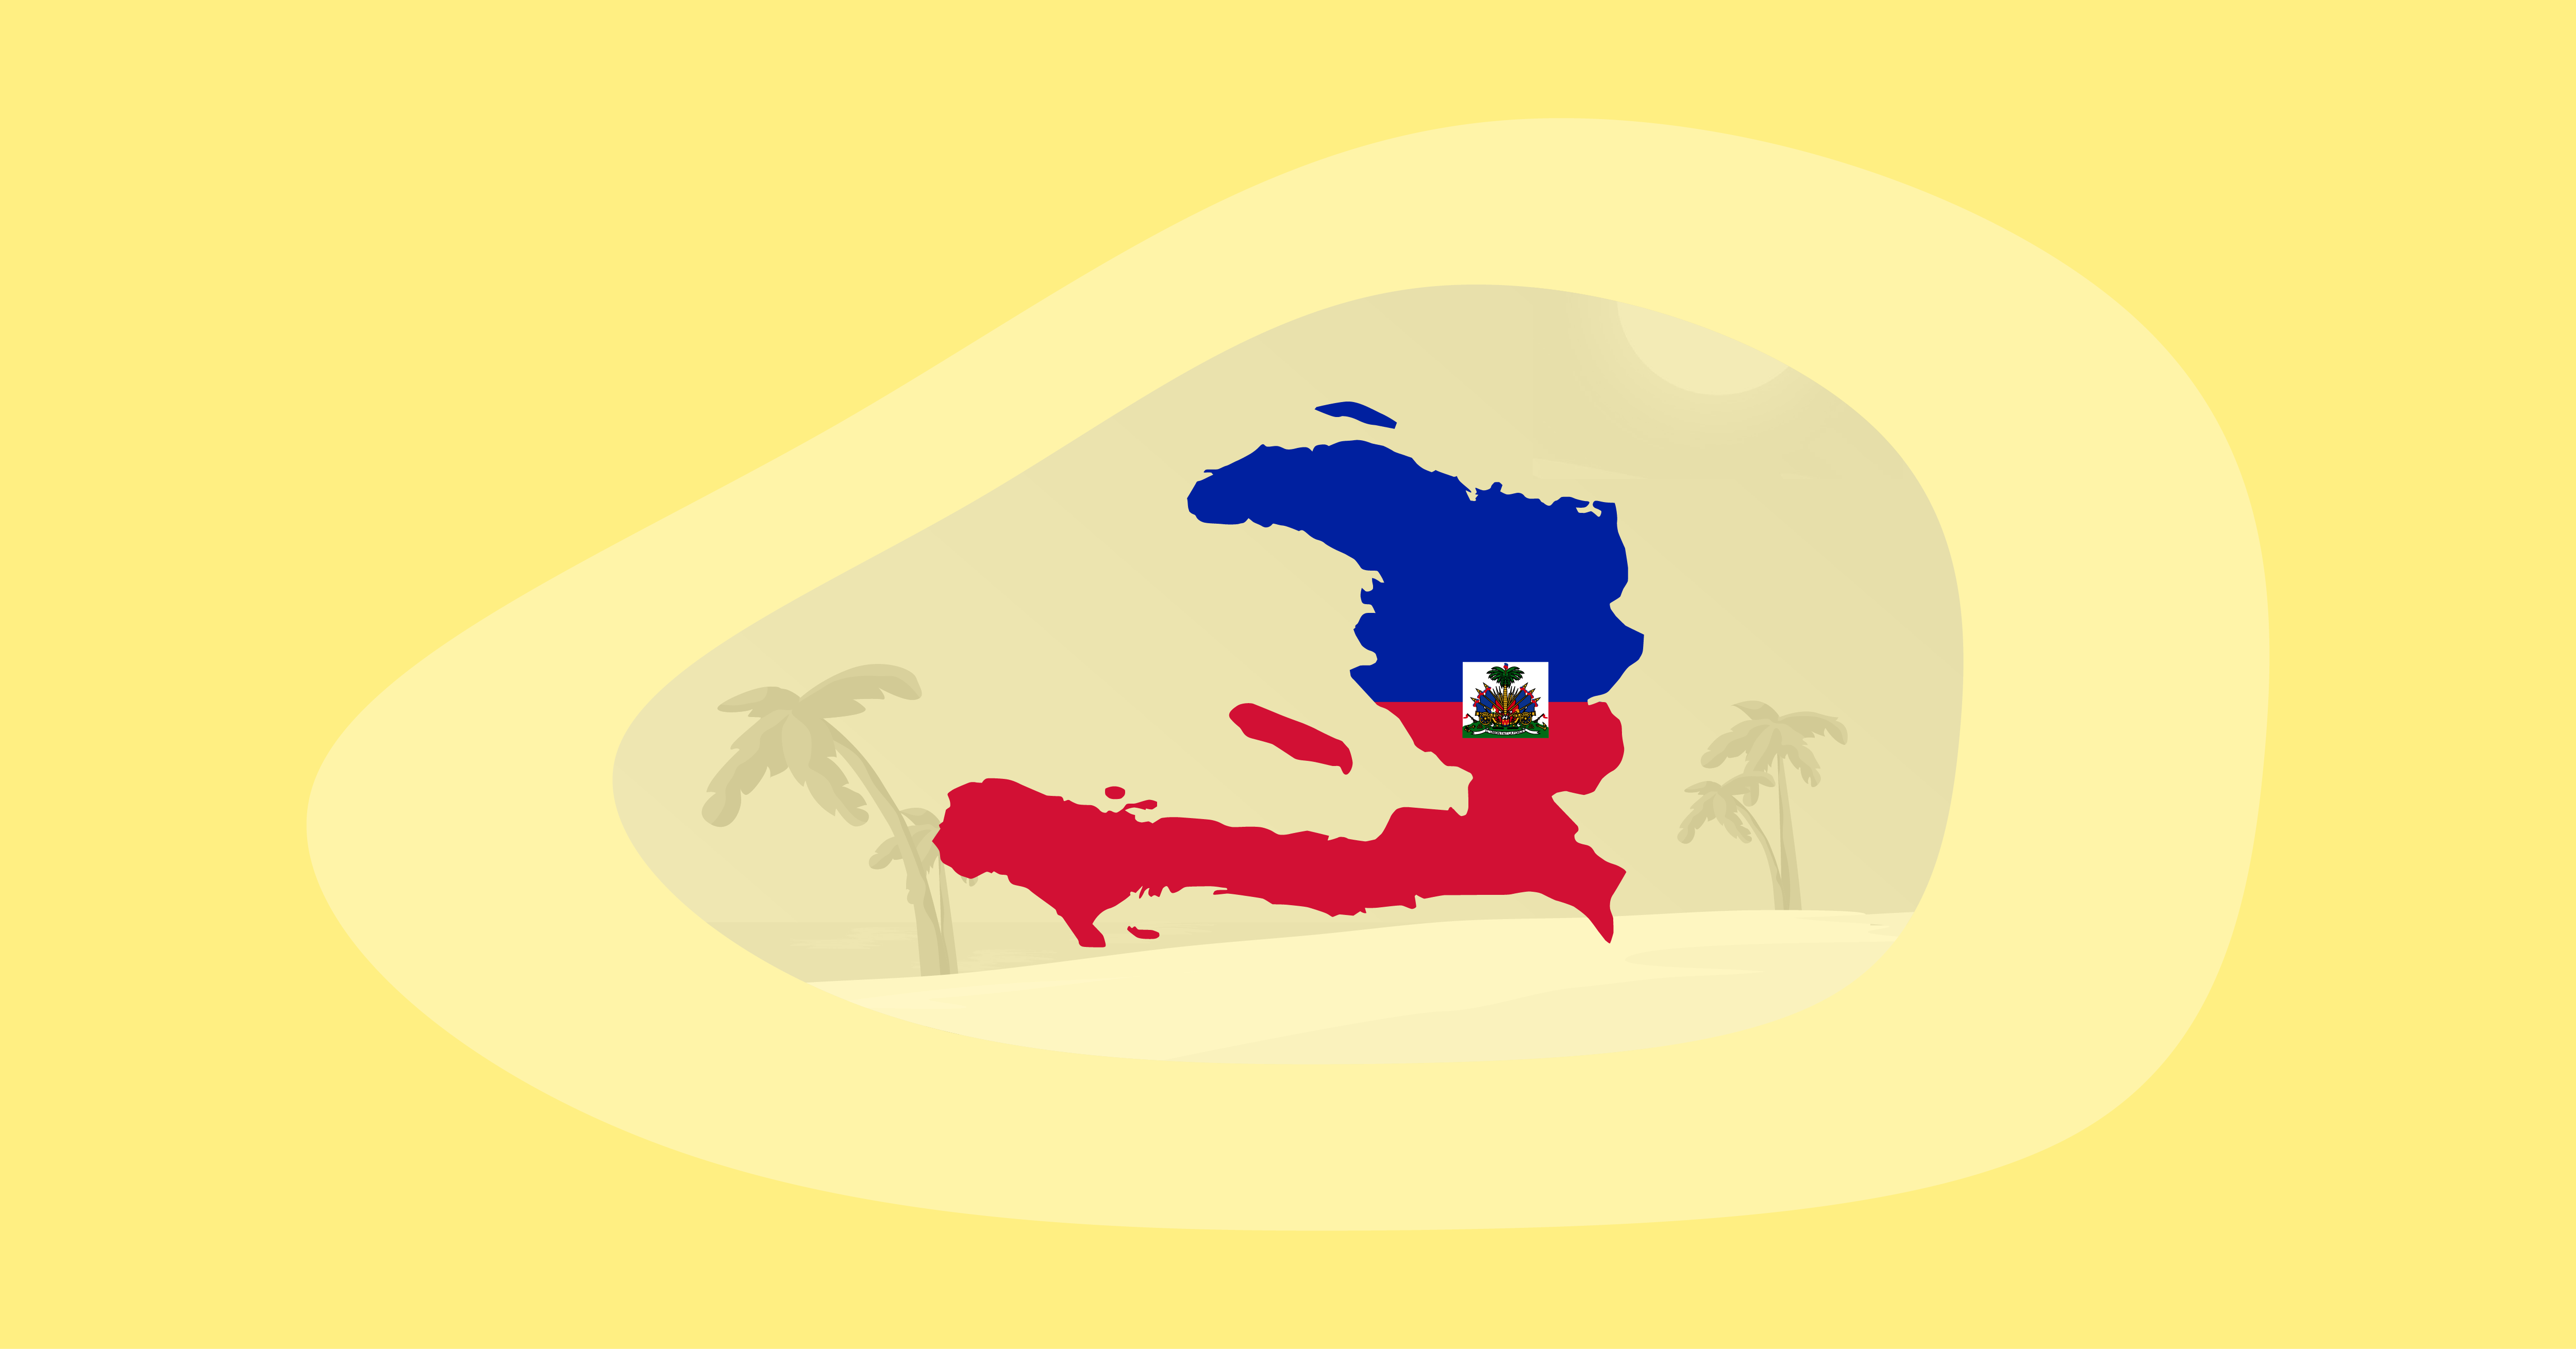 Illustration of the Haiti country map in the colors of its flag